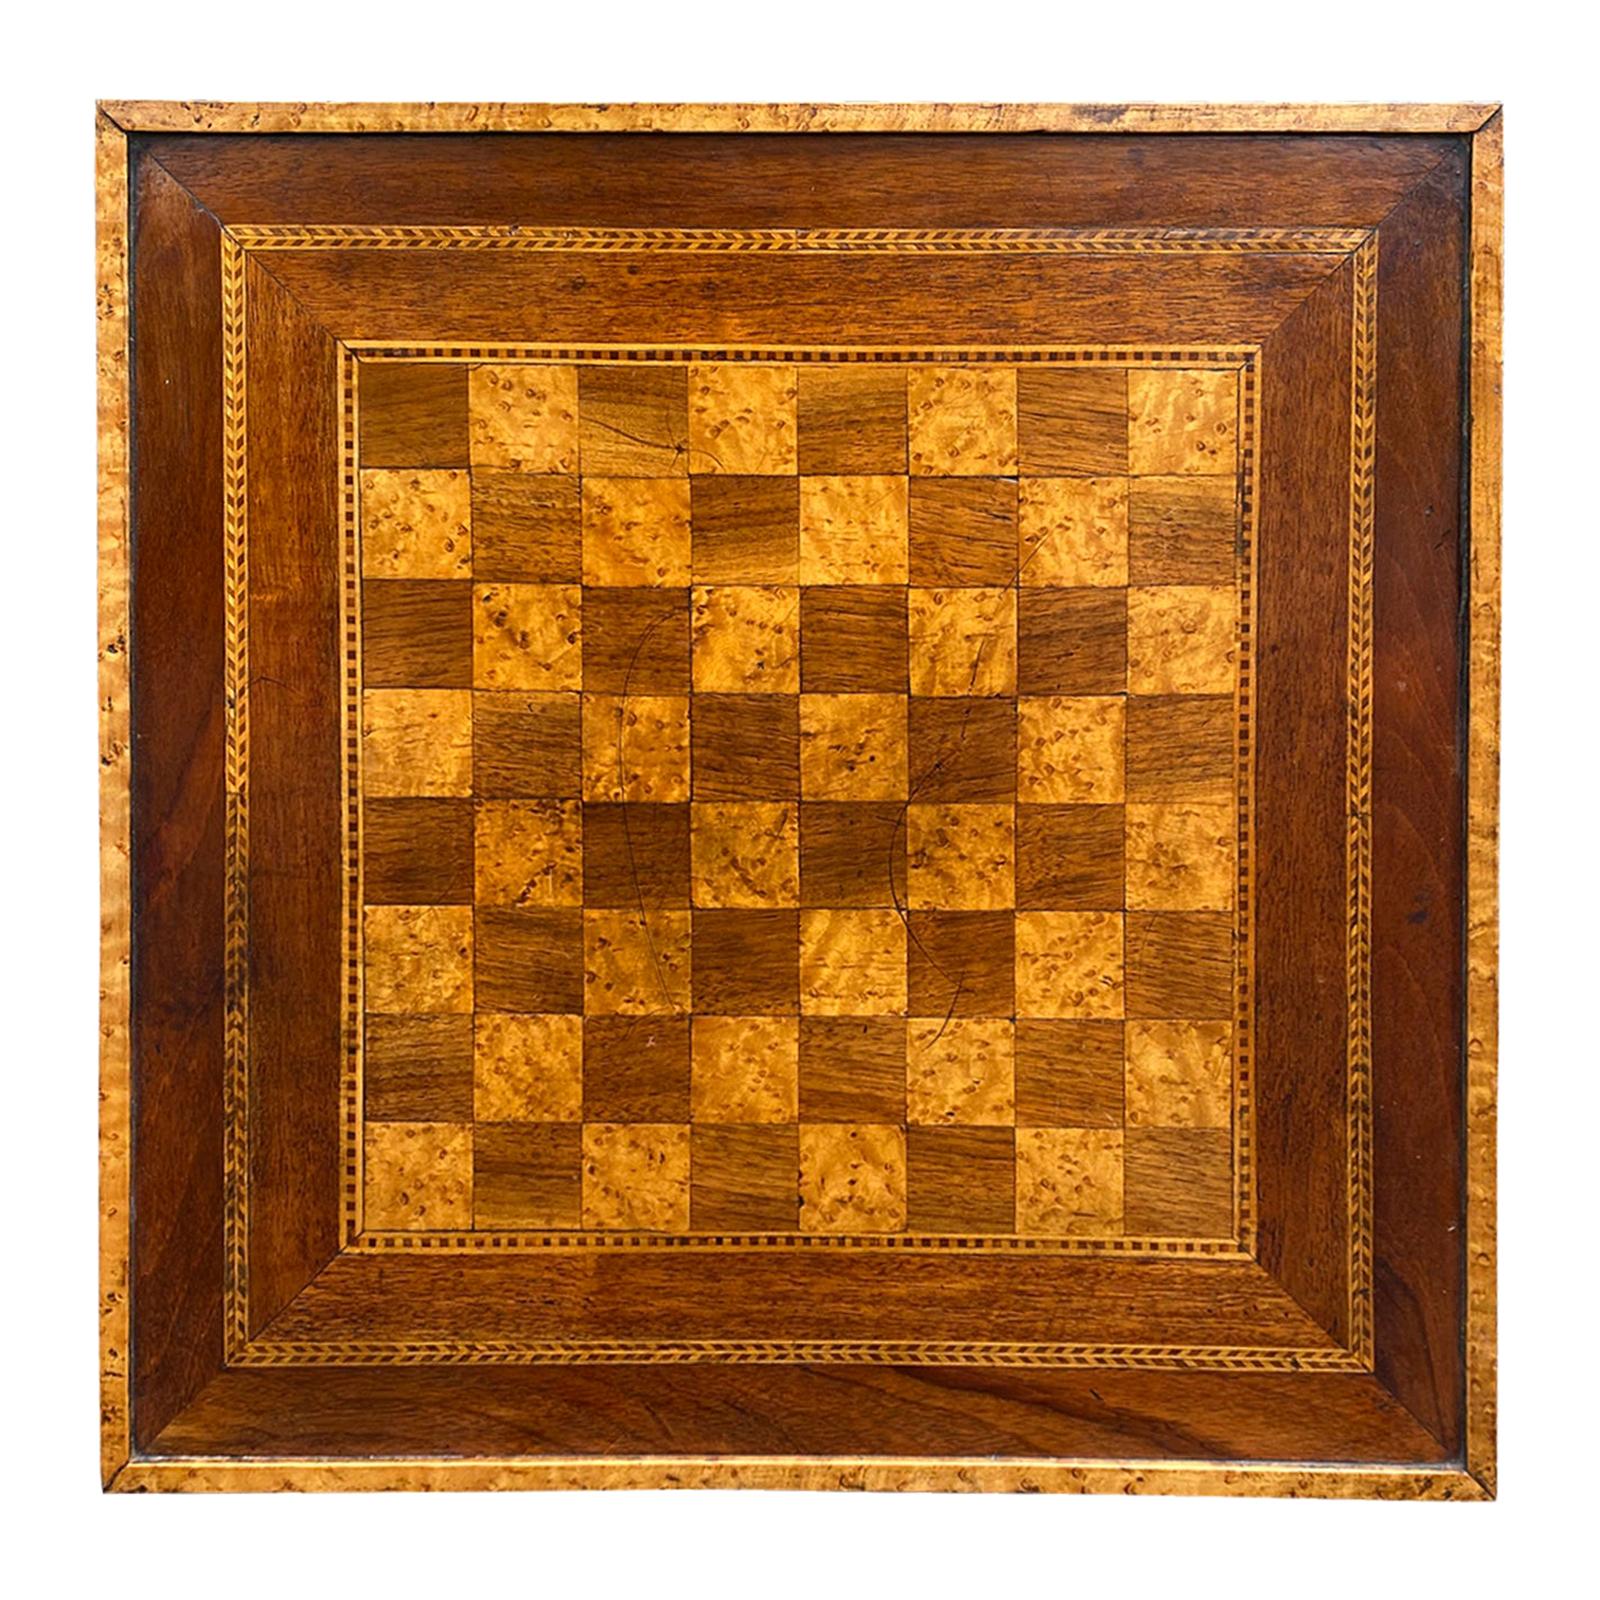 19th Century Inlaid Game Board